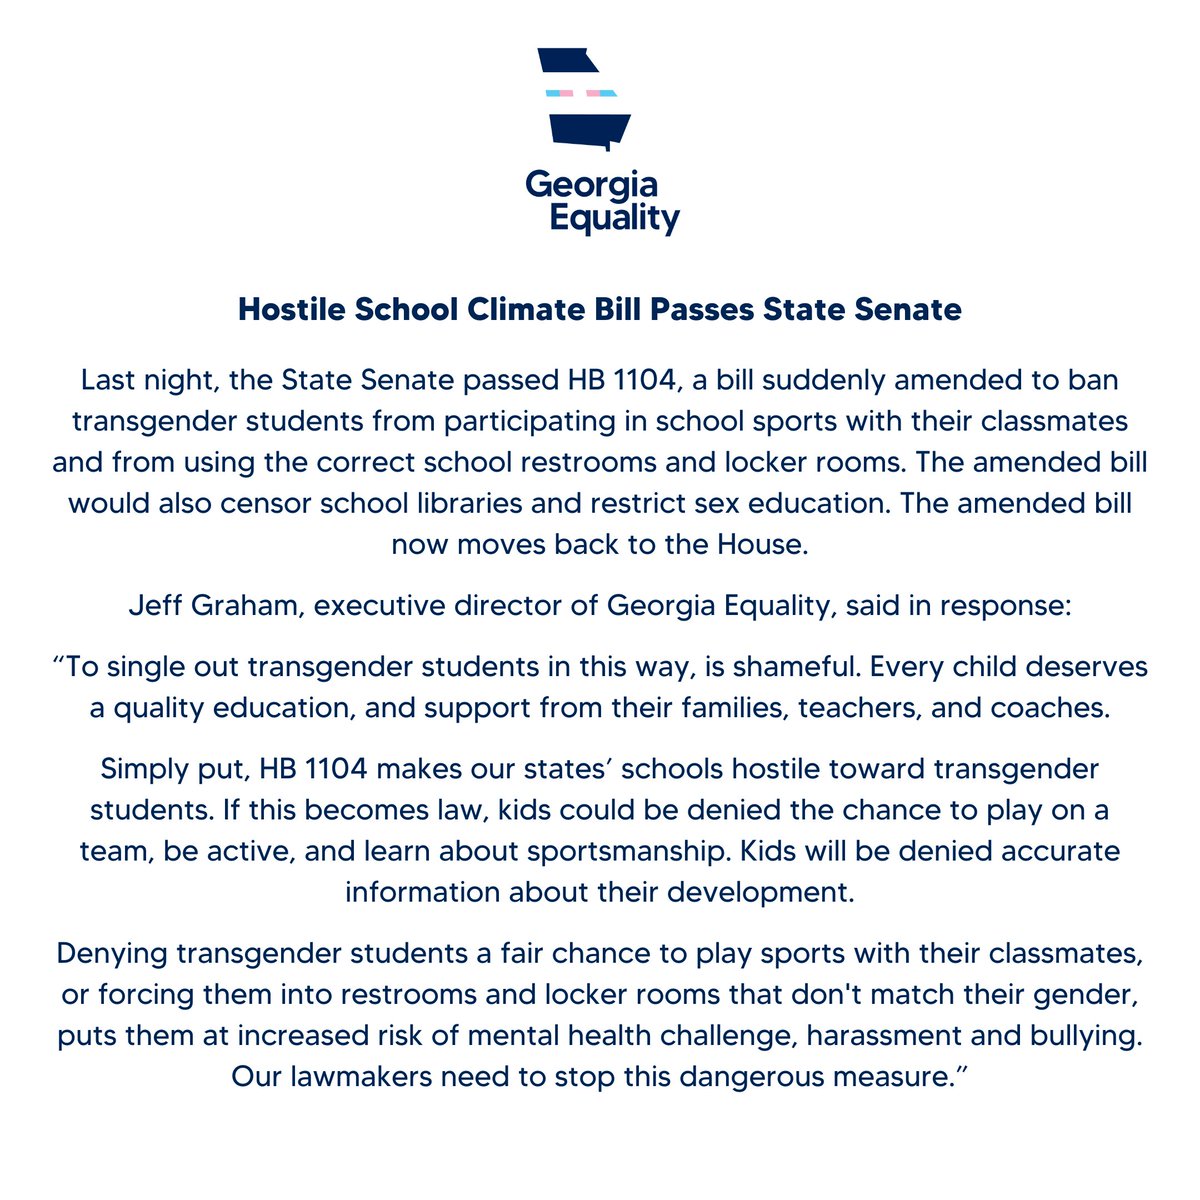 Last night, the State Senate passed HB 1104, a previously good bill suddenly amended to restrict transgender students from participating in schools sports with their peers and from using the correct school restrooms & locker rooms. See our below statement for more info: